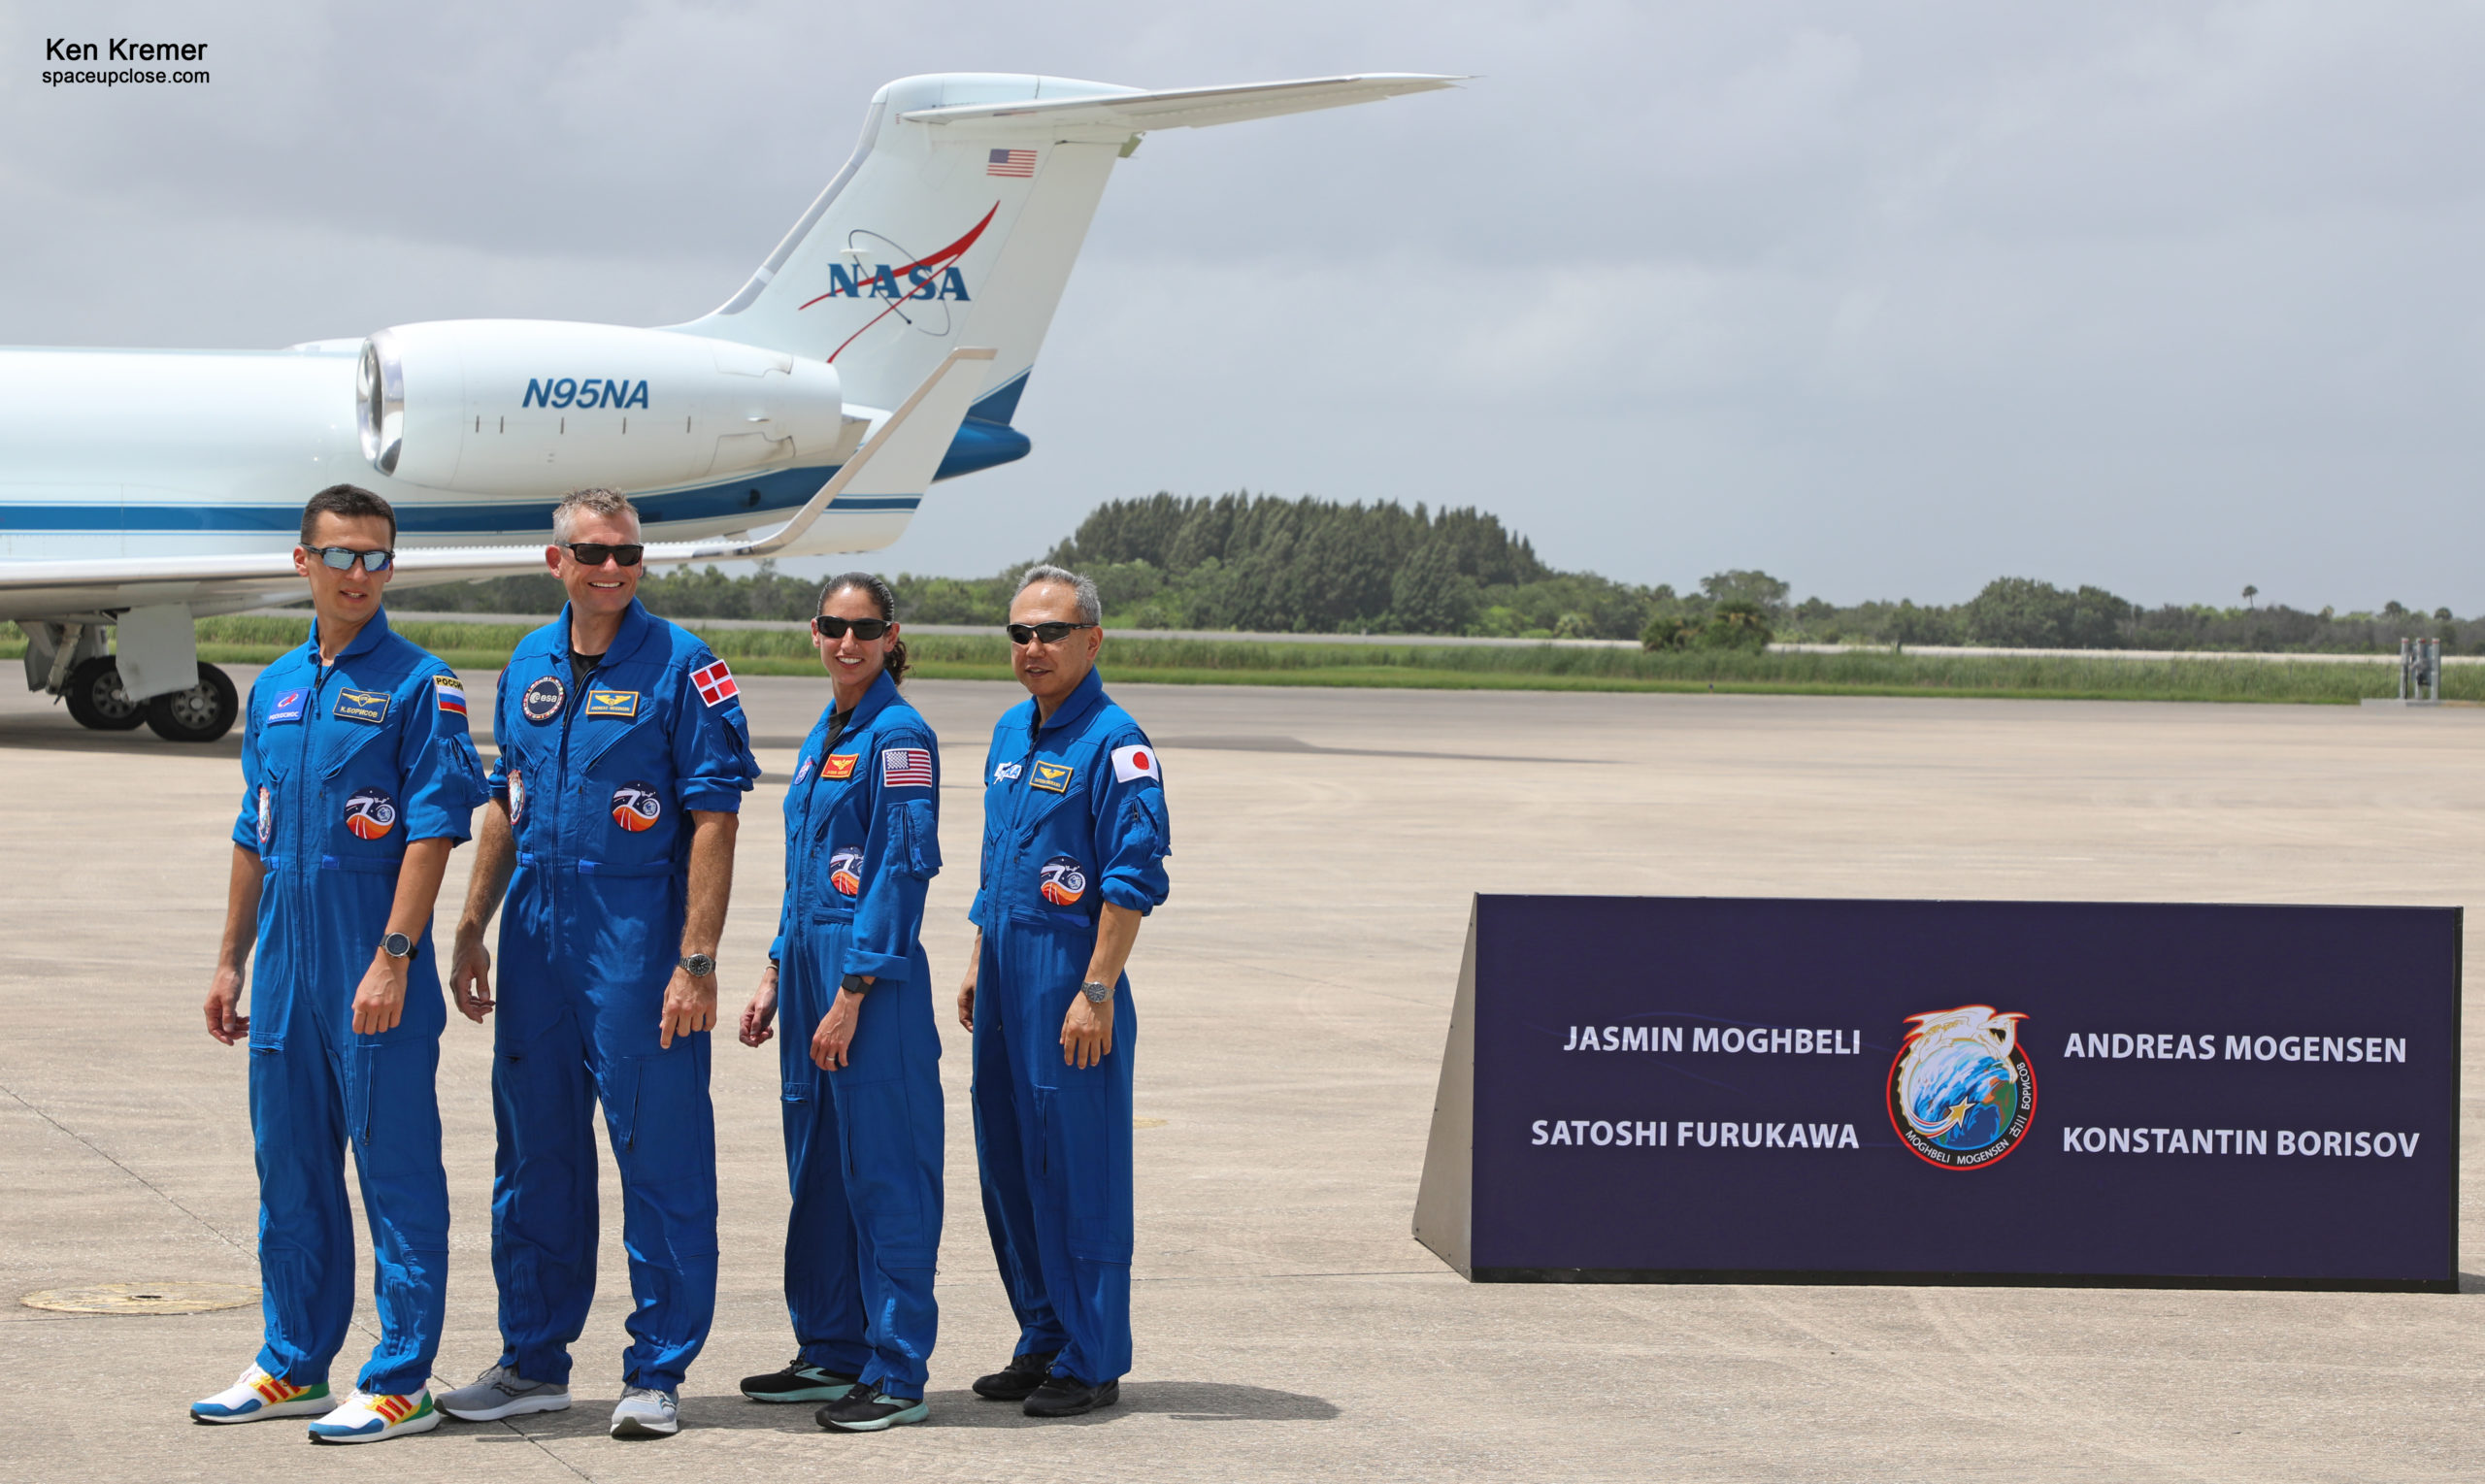 Multinational Crew-7 Spaceflyers Arrive at KSC for NASA SpaceX Falcon 9 Launch on Aug 26: Photos